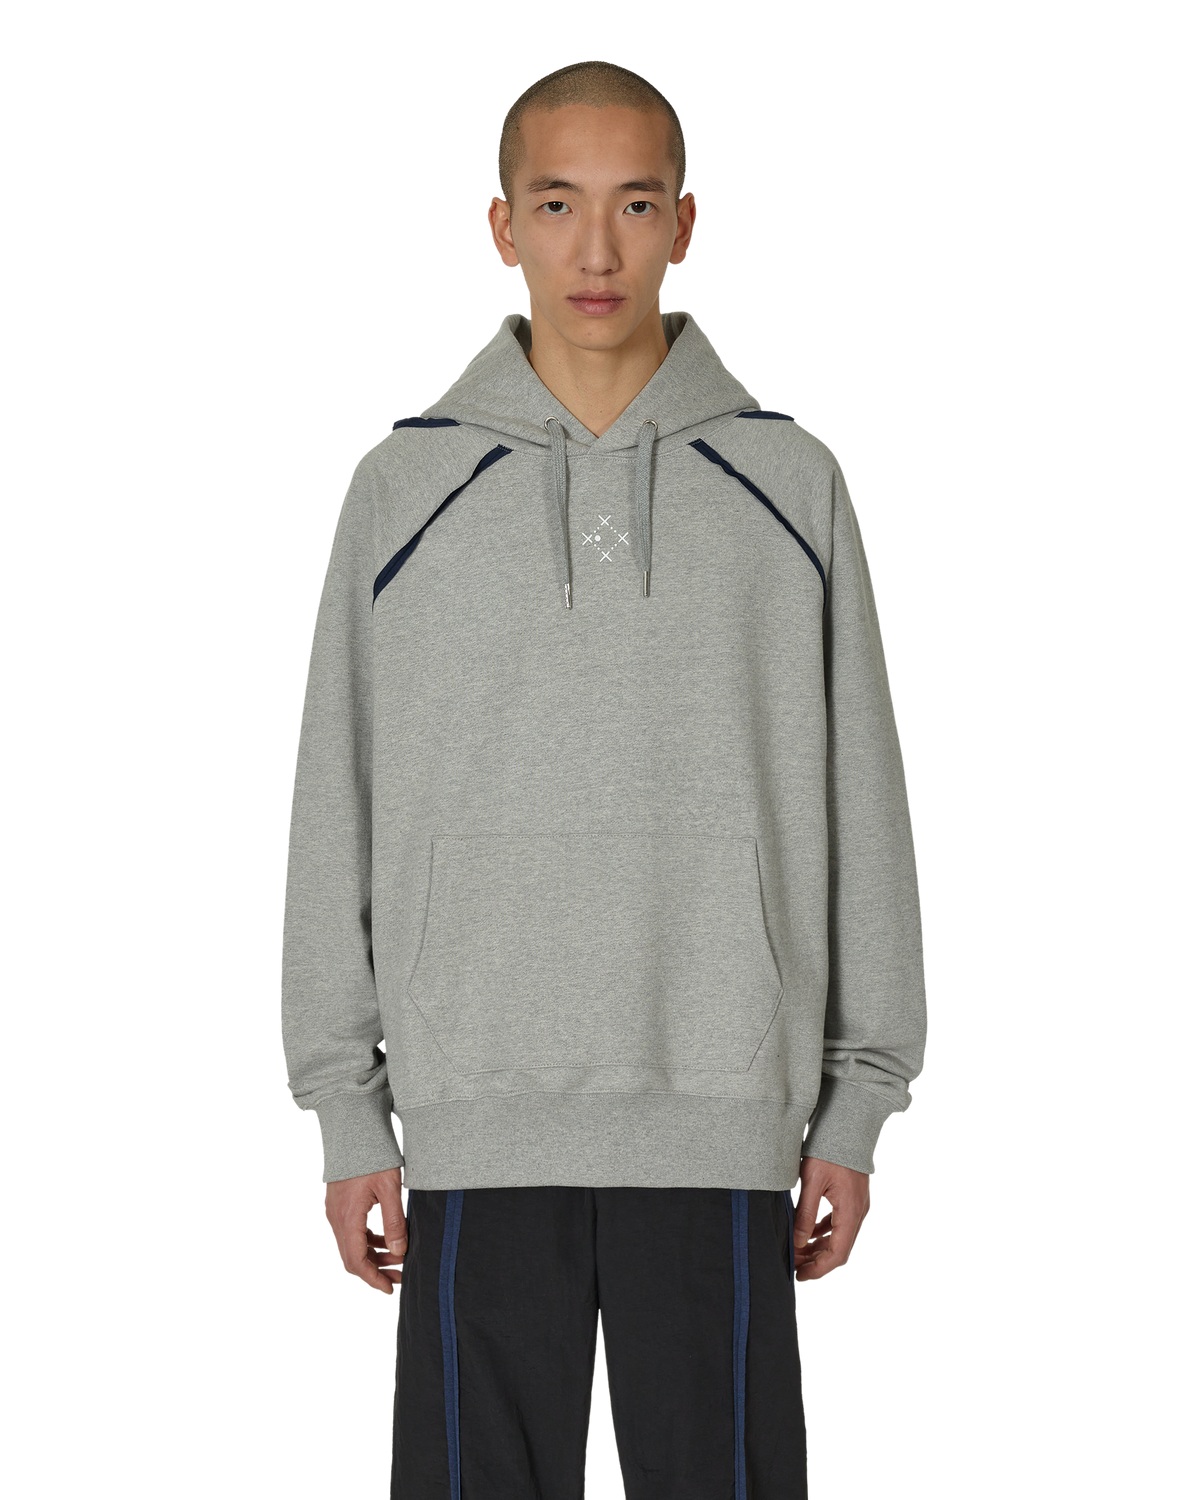 _J.L - A.L_ _J.L-A.L_ x Sound Sports Hoodie J297463-XL-Grey front